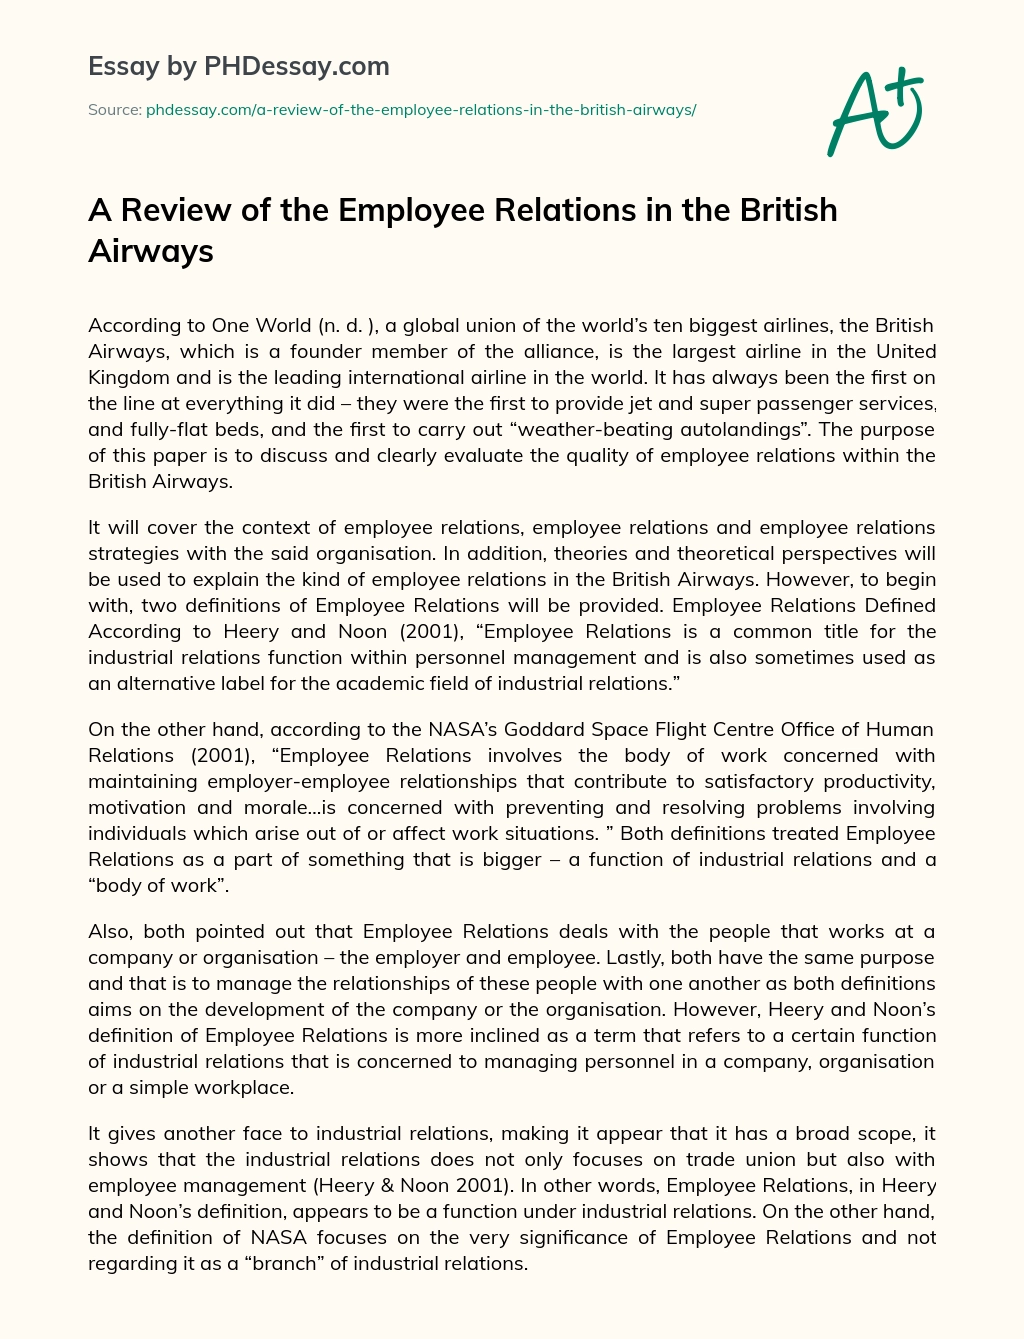 A Review of the Employee Relations in the British Airways essay